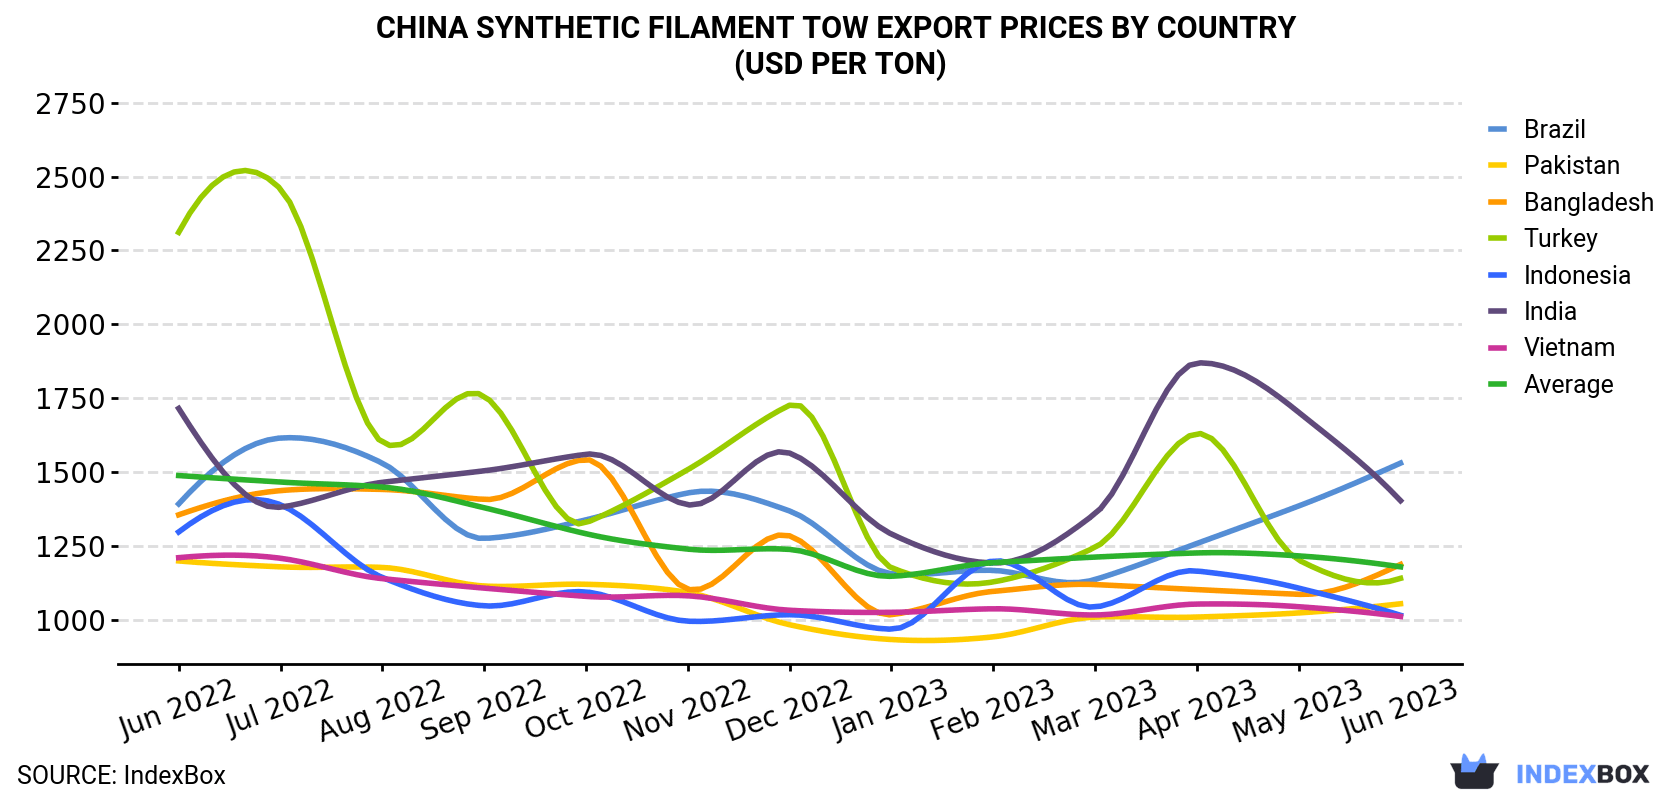 China Synthetic Filament Tow Export Prices By Country (USD Per Ton)